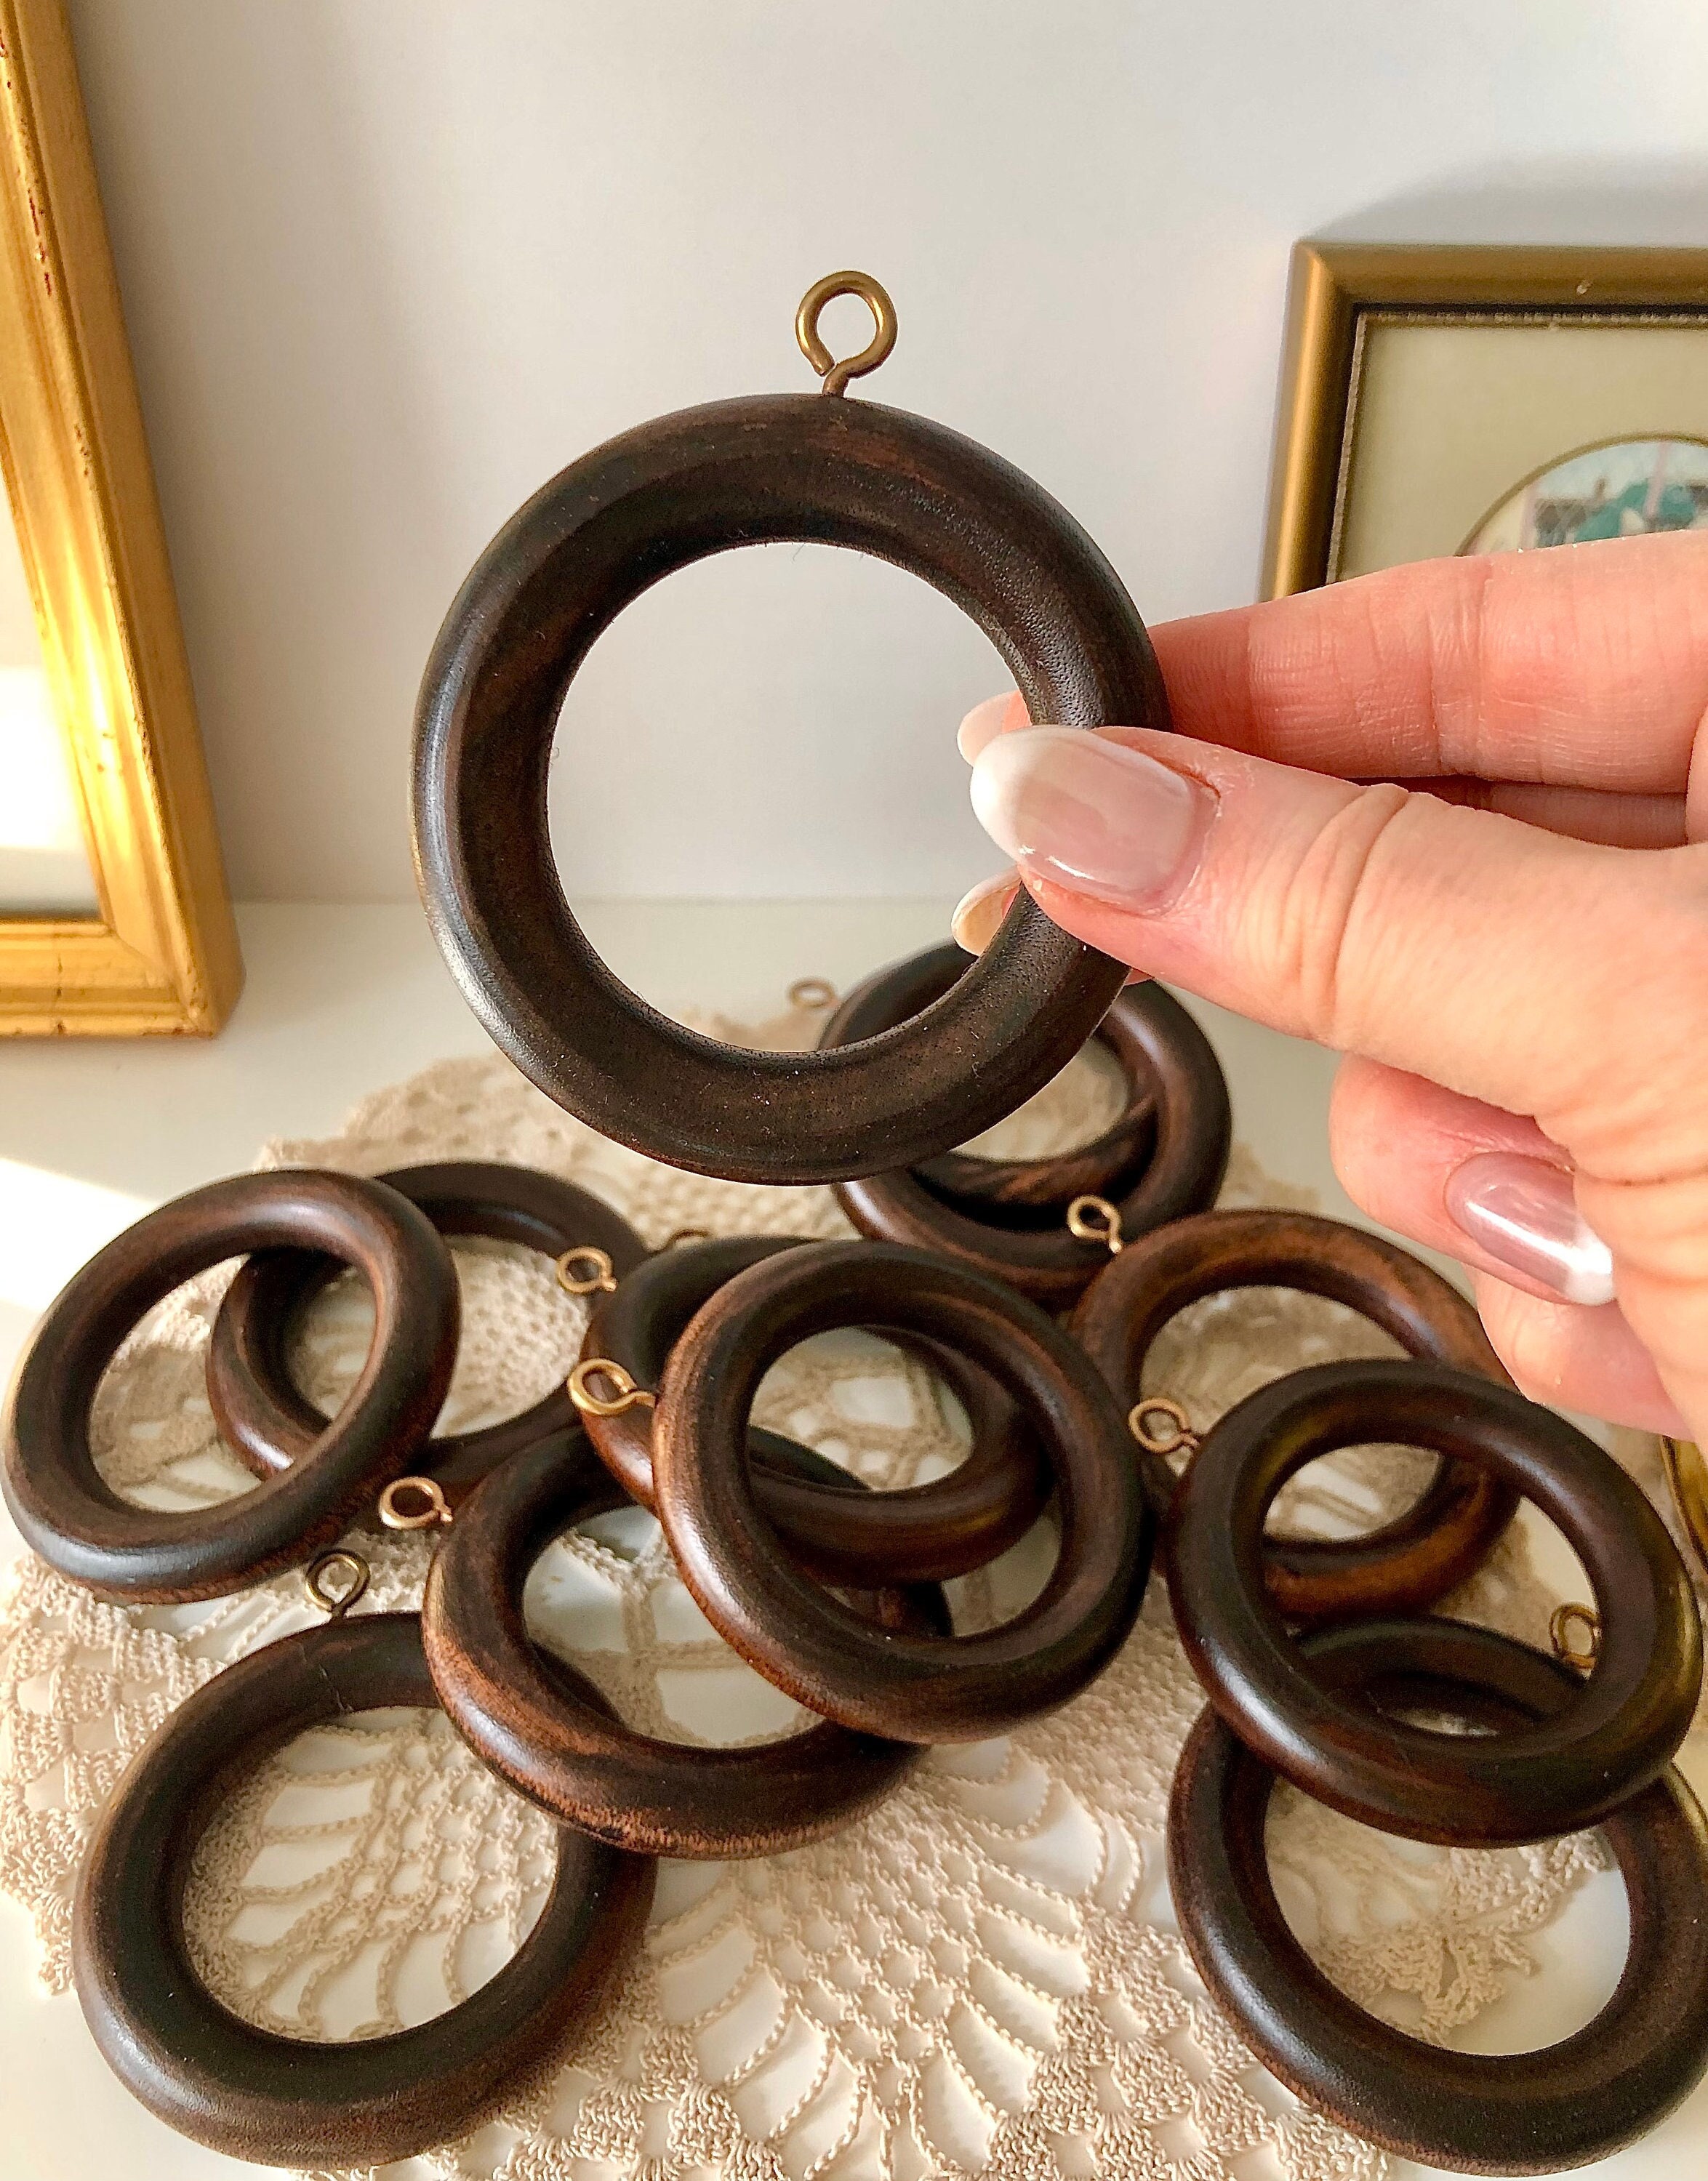  Handmade Wooden Curtain Ring,Wood Drapery Rings,Curtain Ring  for Door&Window Decor Easy Glide Curtain Rings:-Smooth,Durable&Stylish  Window(Inner Dia 1.75,Outer Dia 2.5 Inch) Oakwood (100) : Home & Kitchen